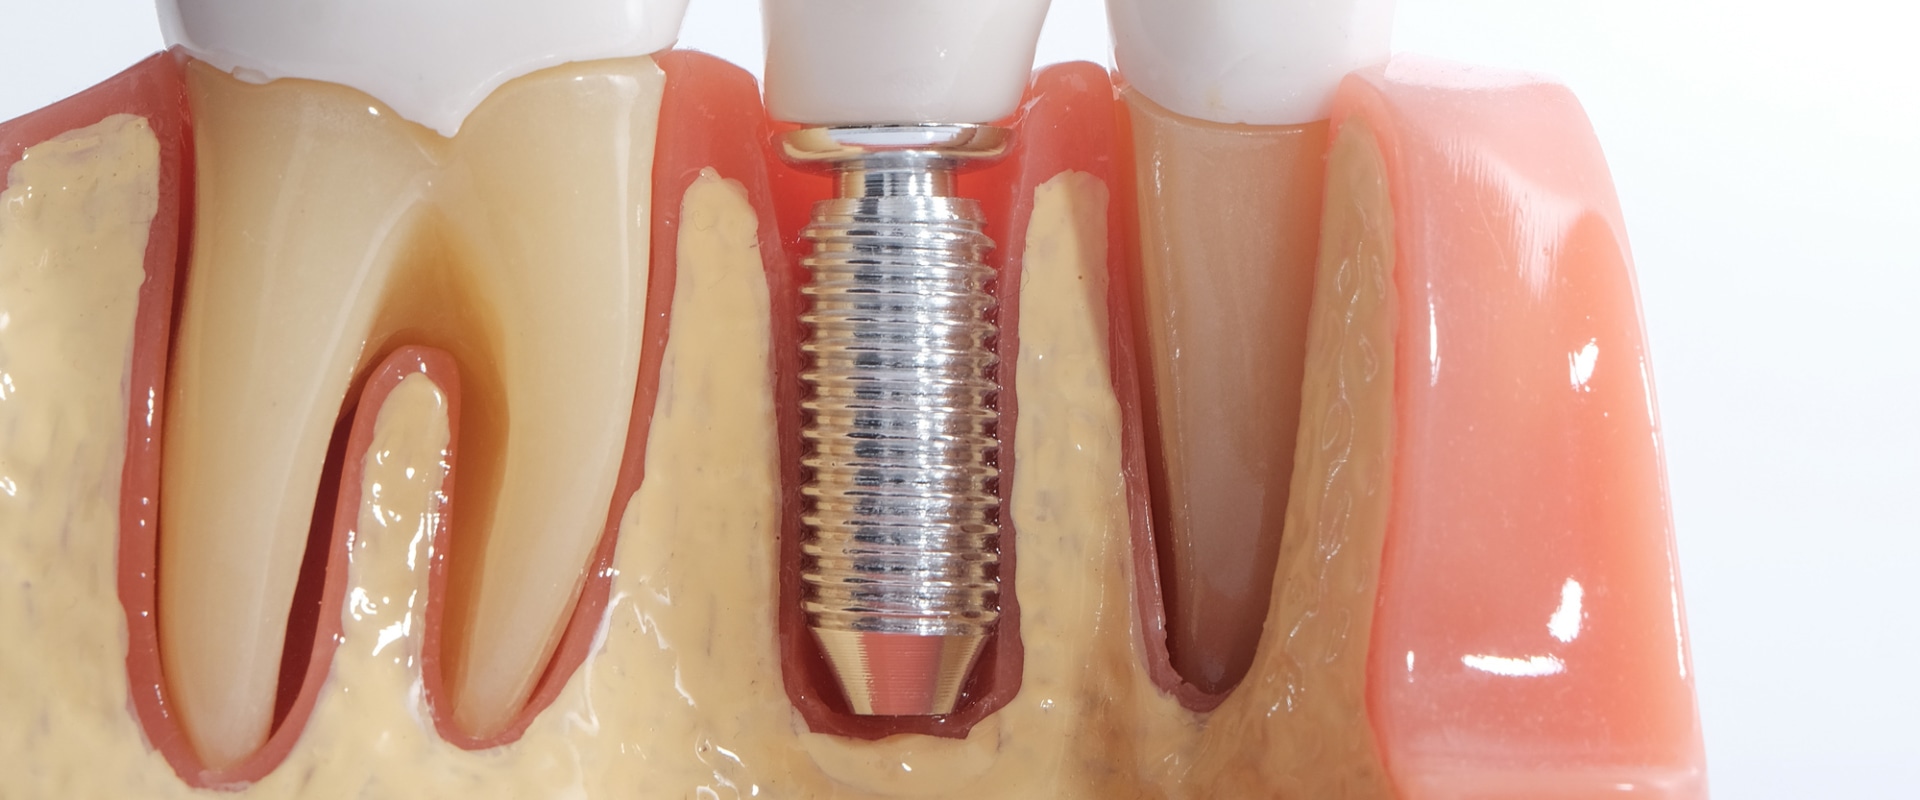 All You Need To Know About Getting Dental Implants In Cedar Park